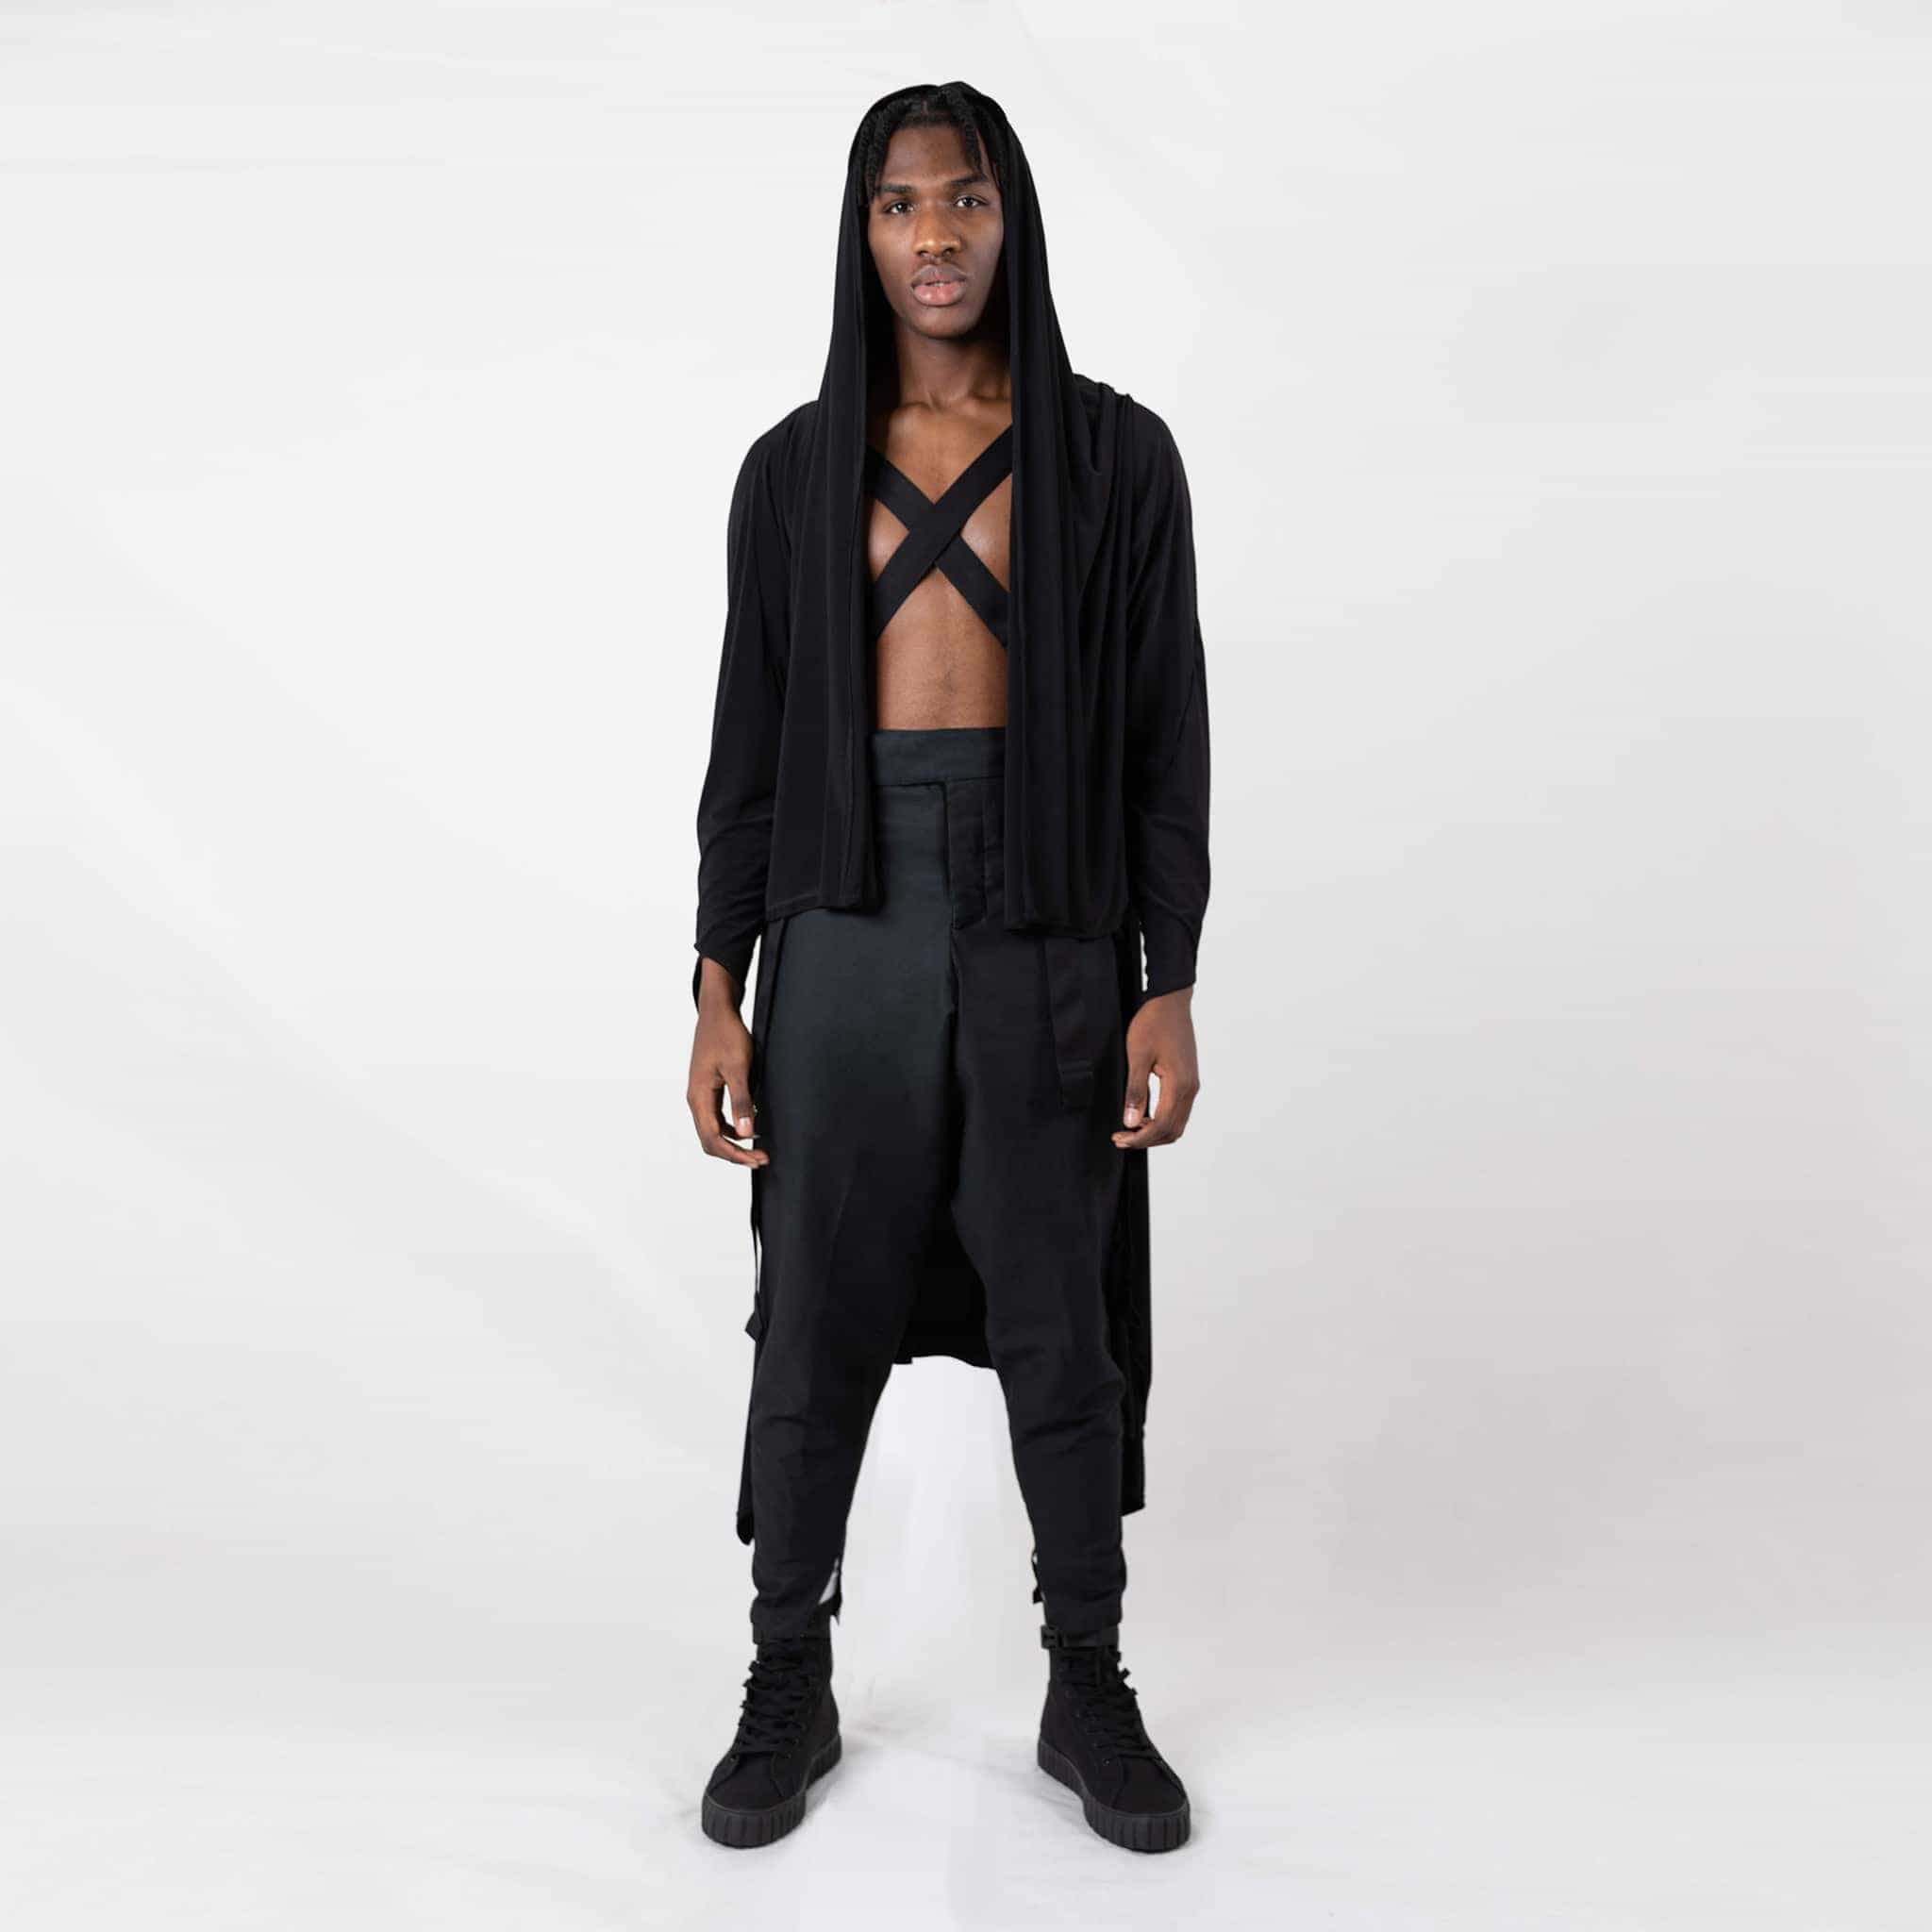   ZERØ London - Front alt. full length view, black long sleeved zero waste cardigan robe with harness and black trousers designed & made in London